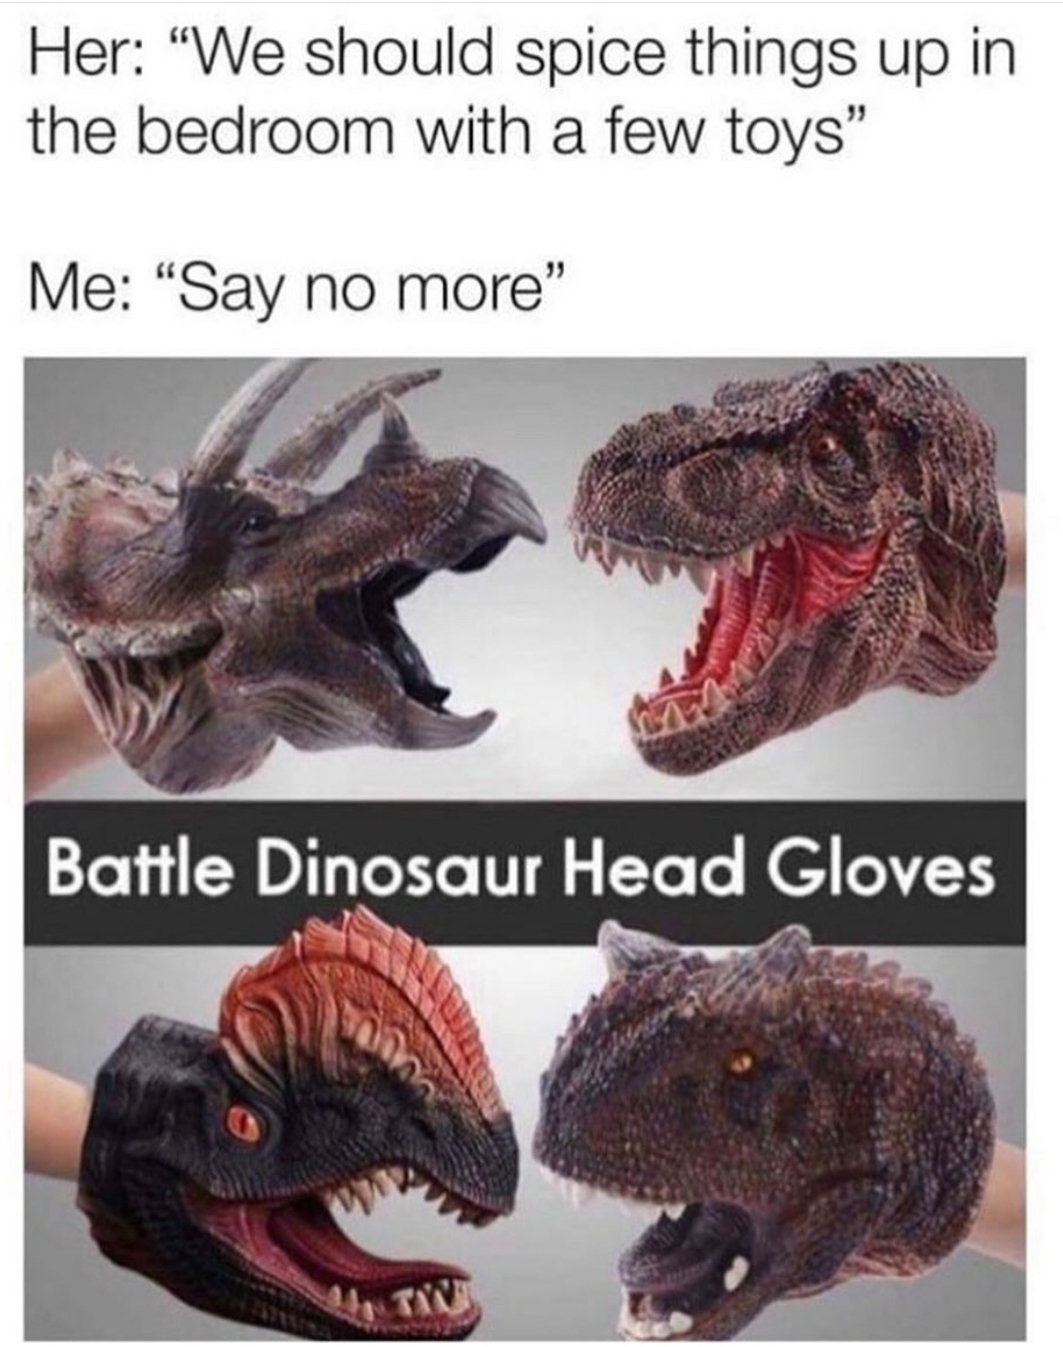 dinosaur battle gloves - Her "We should spice things up in the bedroom with a few toys" Me Say no more" Battle Dinosaur Head Gloves